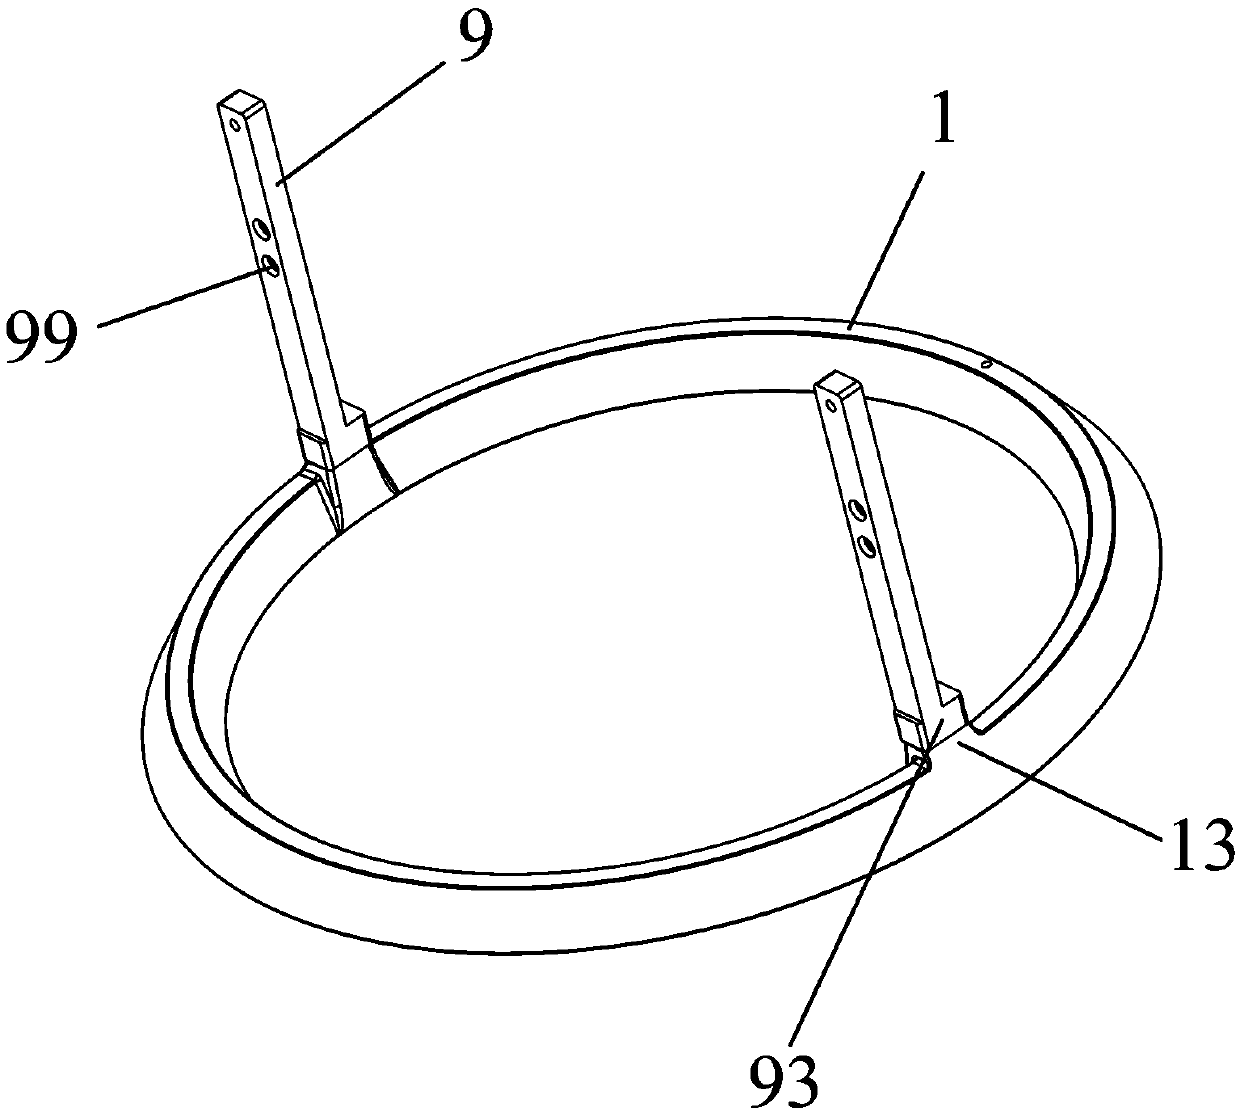 An annular rotating base and electronic equipment